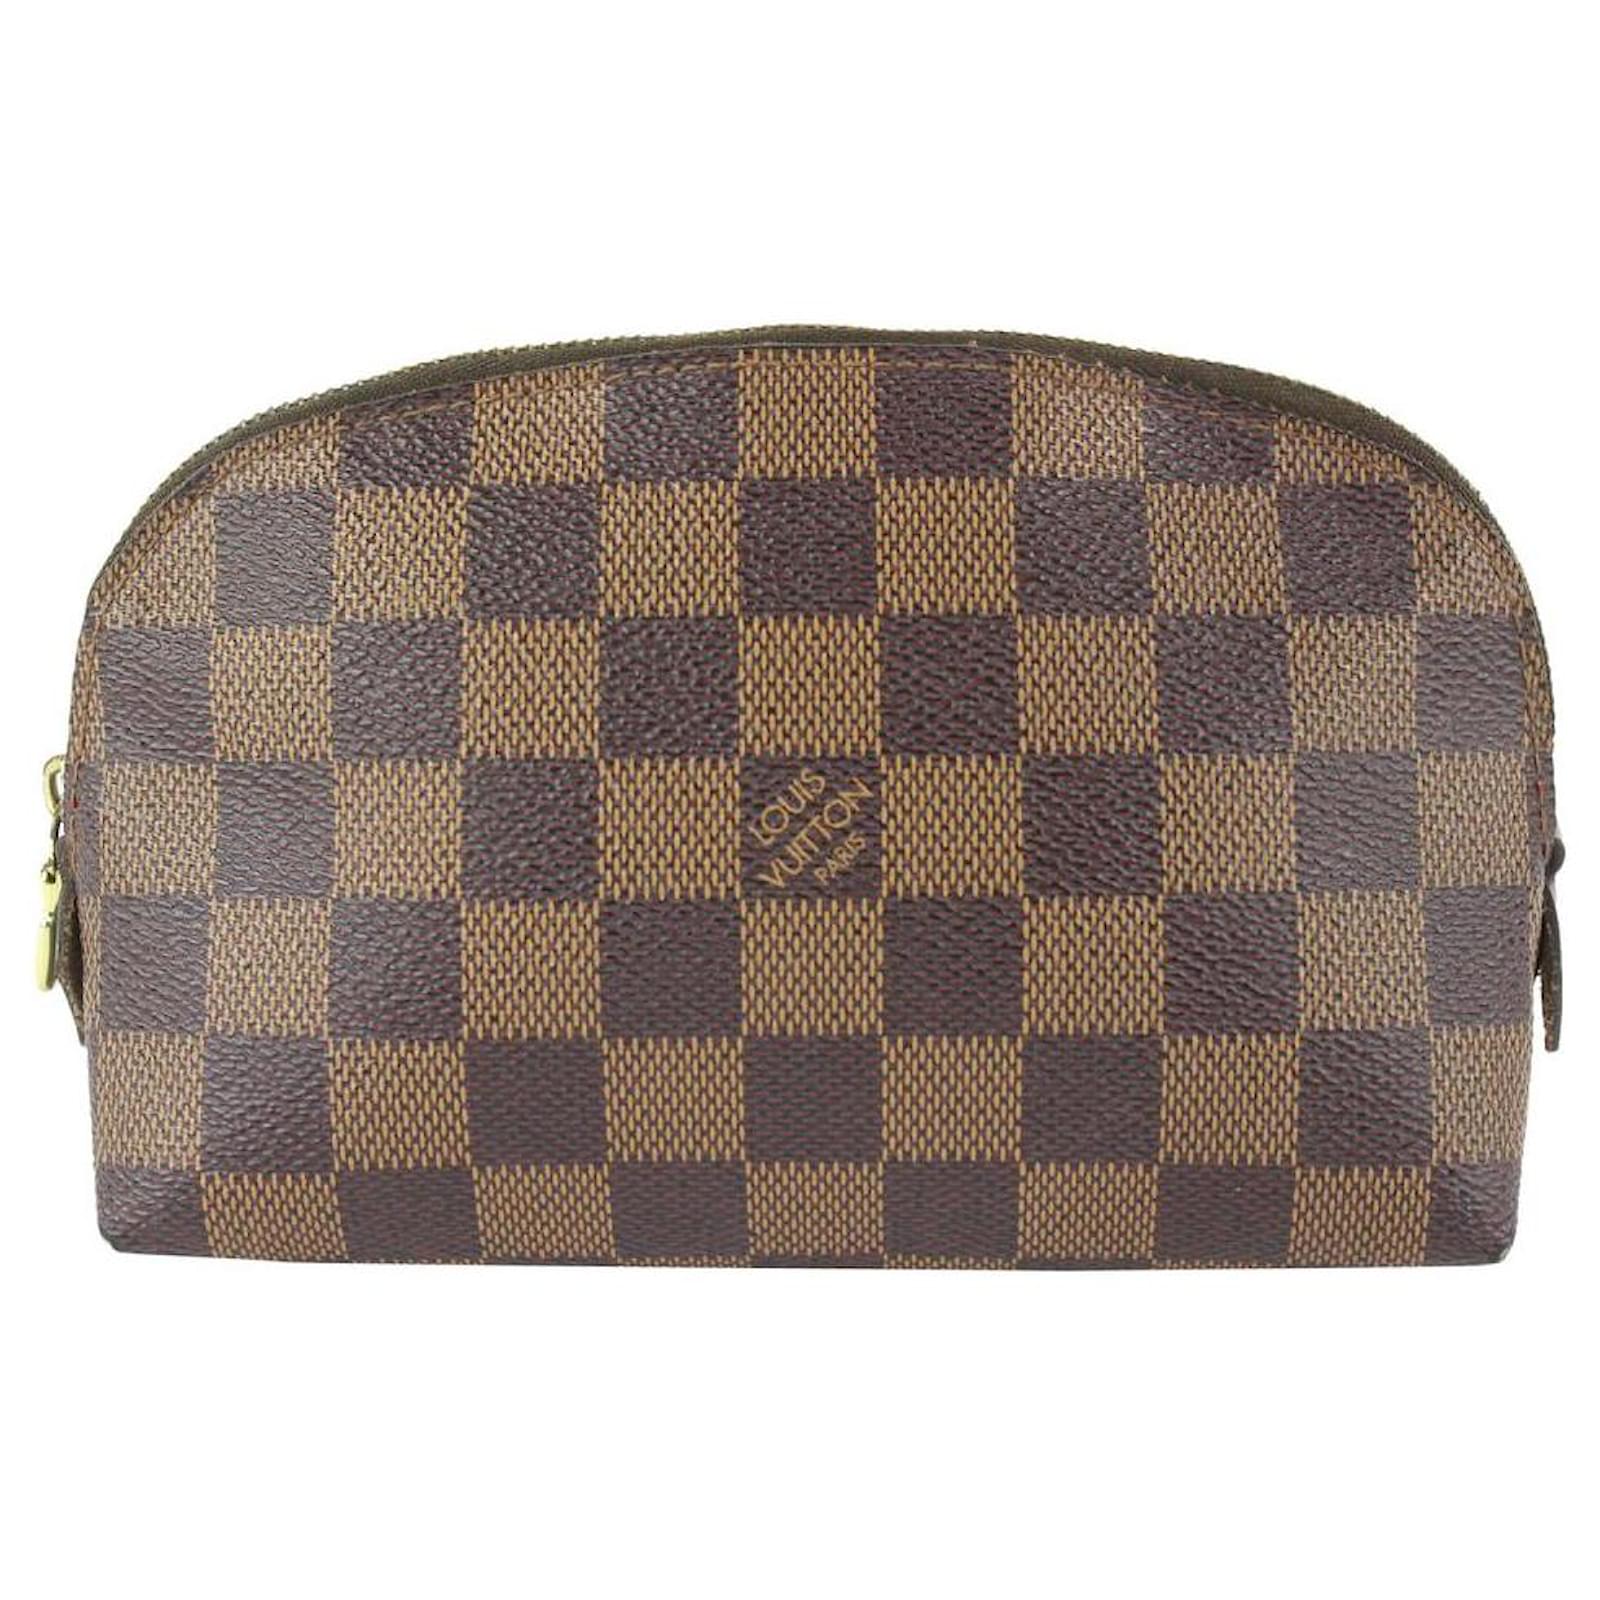 Louis Vuitton toiletry pouch 26 // cosmetic pouch pm  Louis vuitton  cosmetic bag, Louis vuitton, Louis vuitton cosmetic pouch